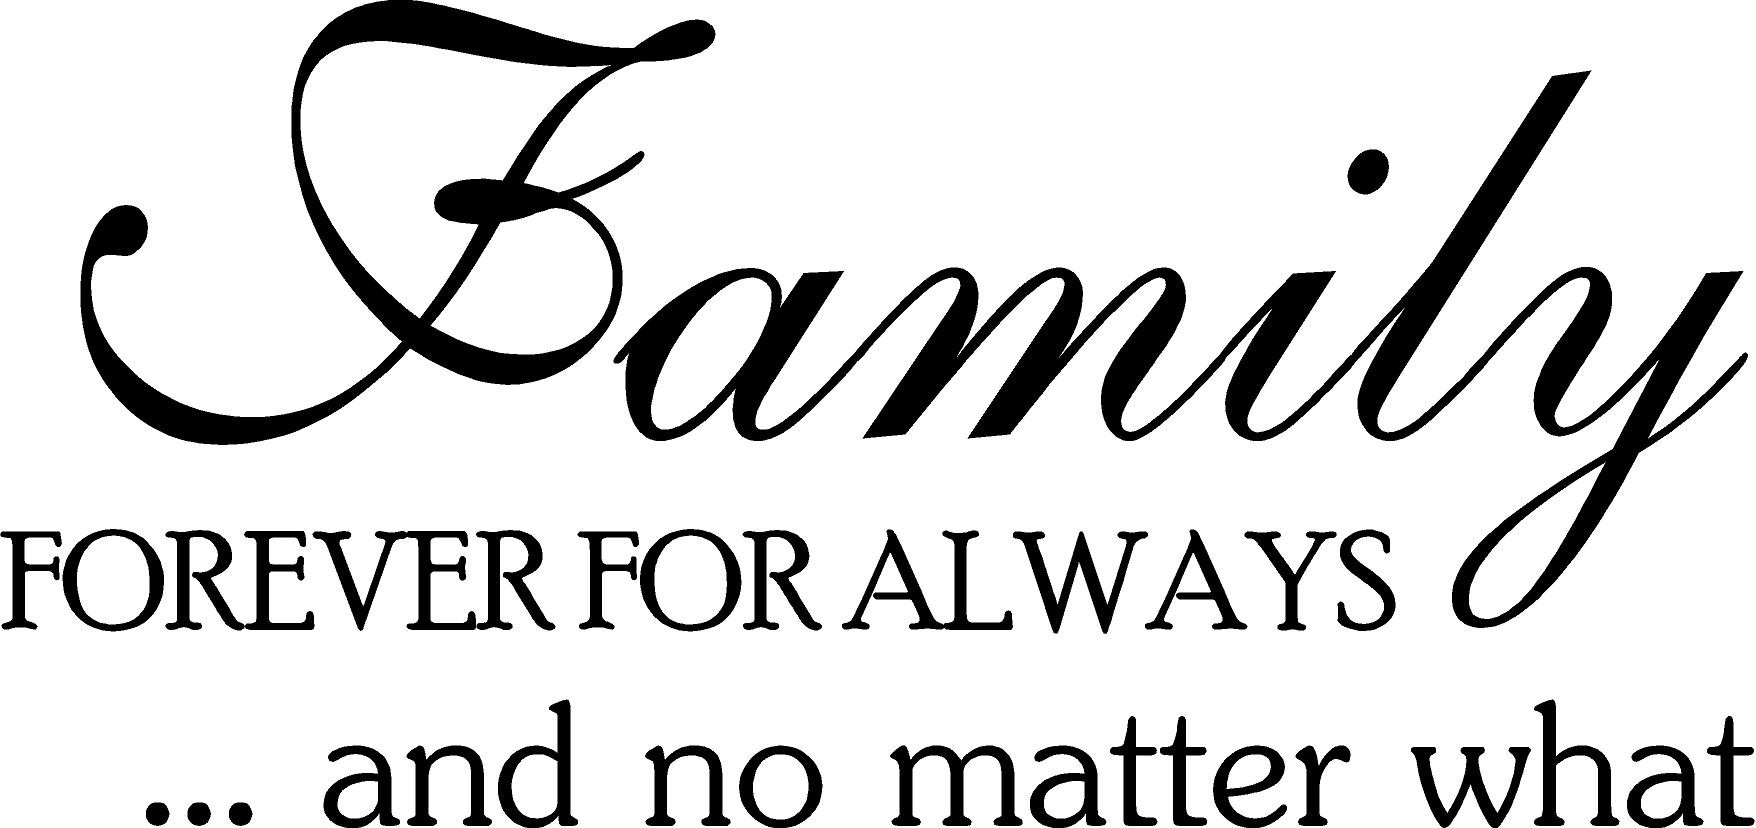 Family Quotes And Sayings
 Broken Family Quotes And Sayings QuotesGram